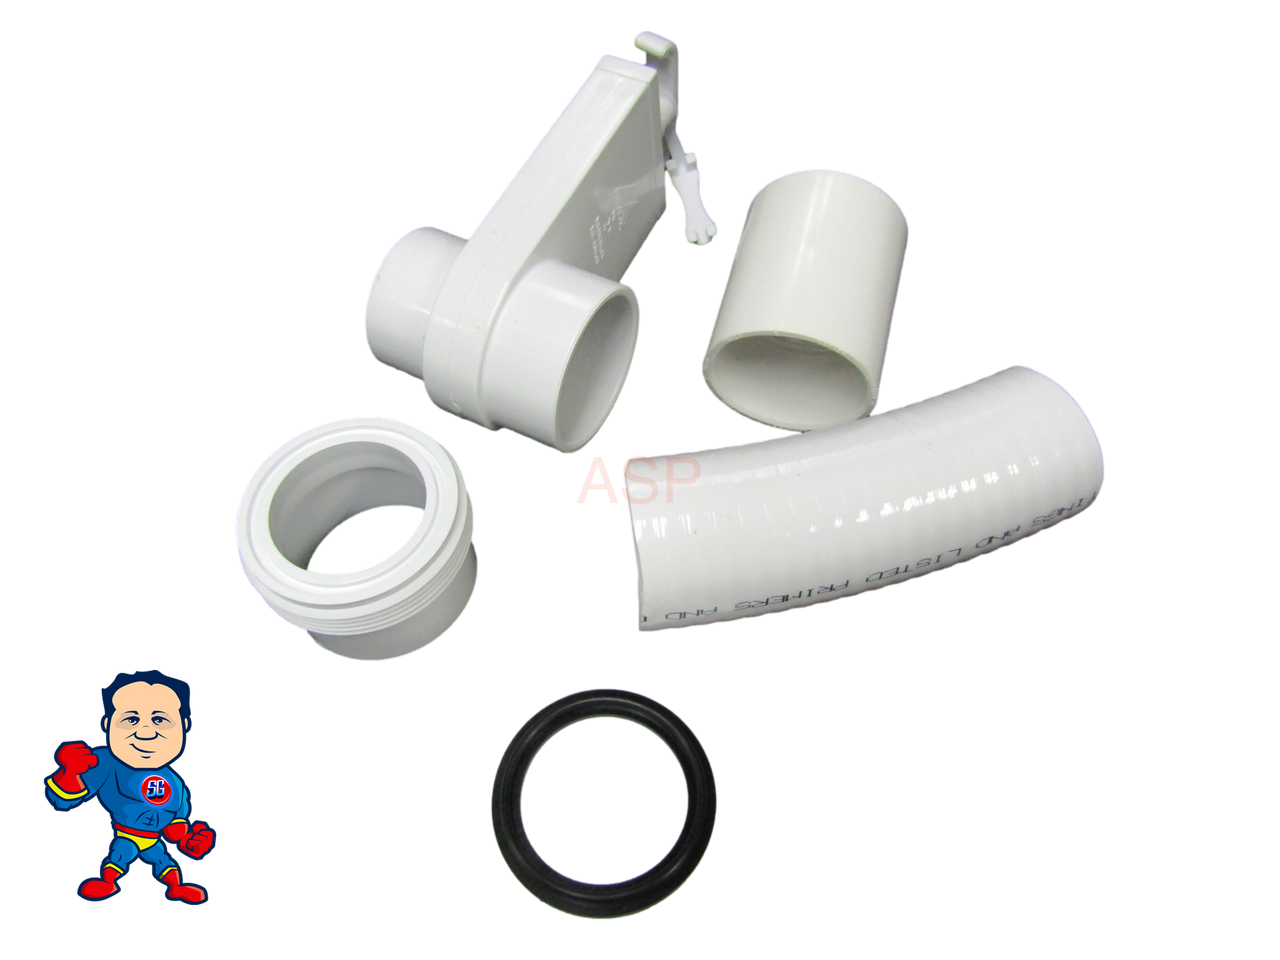 Hot Tub 2 Pump Union Slice To Plumbing Connect Kit